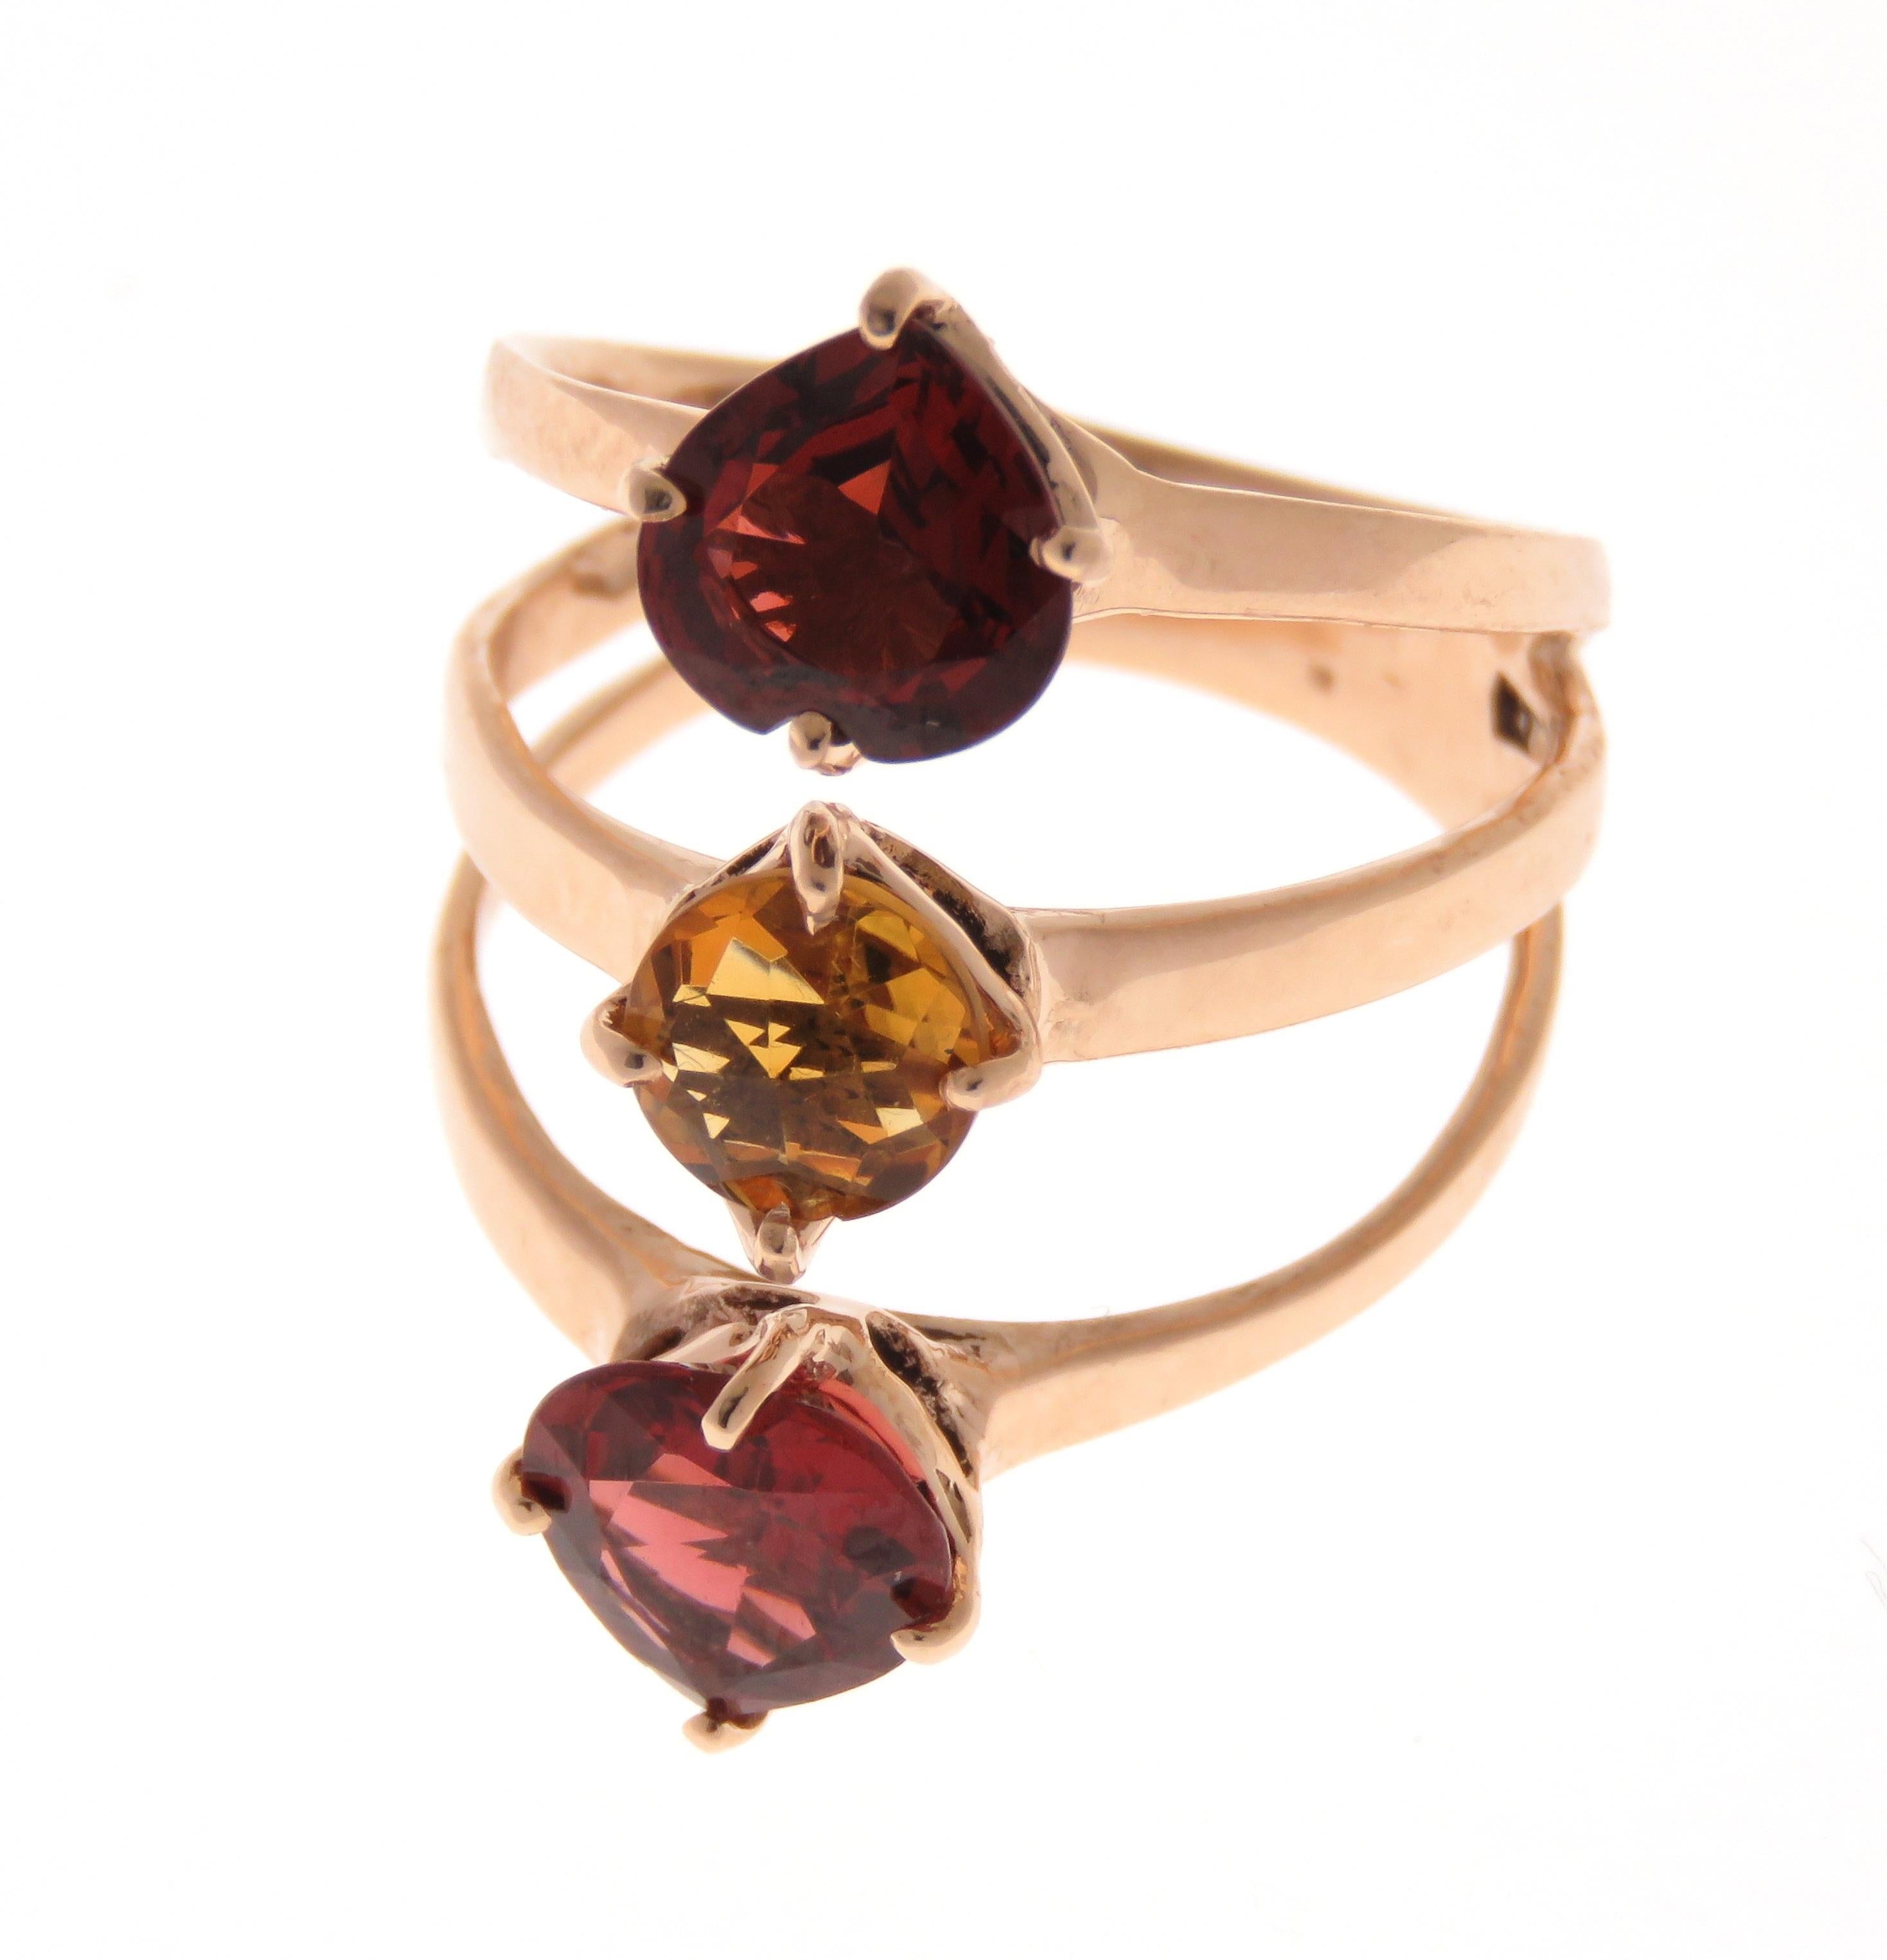 Heart Cut Garnet Rose Cut Citrine 9 Karat Rose Gold Ring Handcrafted in Italy For Sale 1